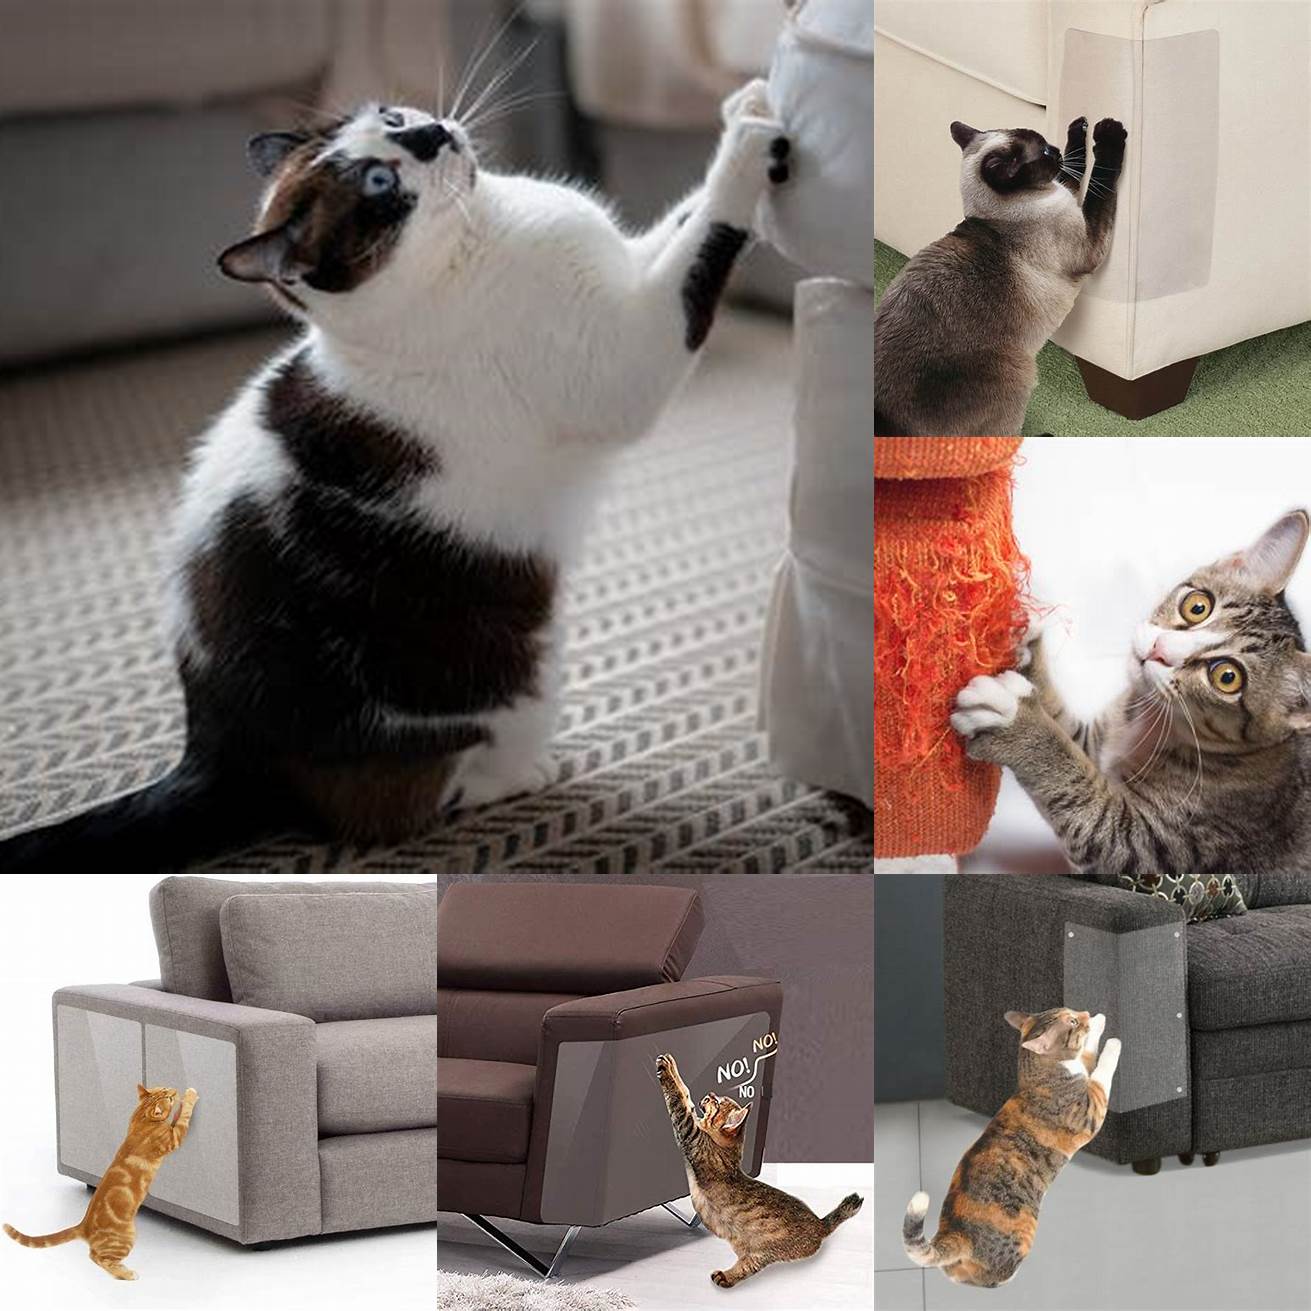 Helps promote healthy scratching behavior which can prevent damage to furniture and other household items